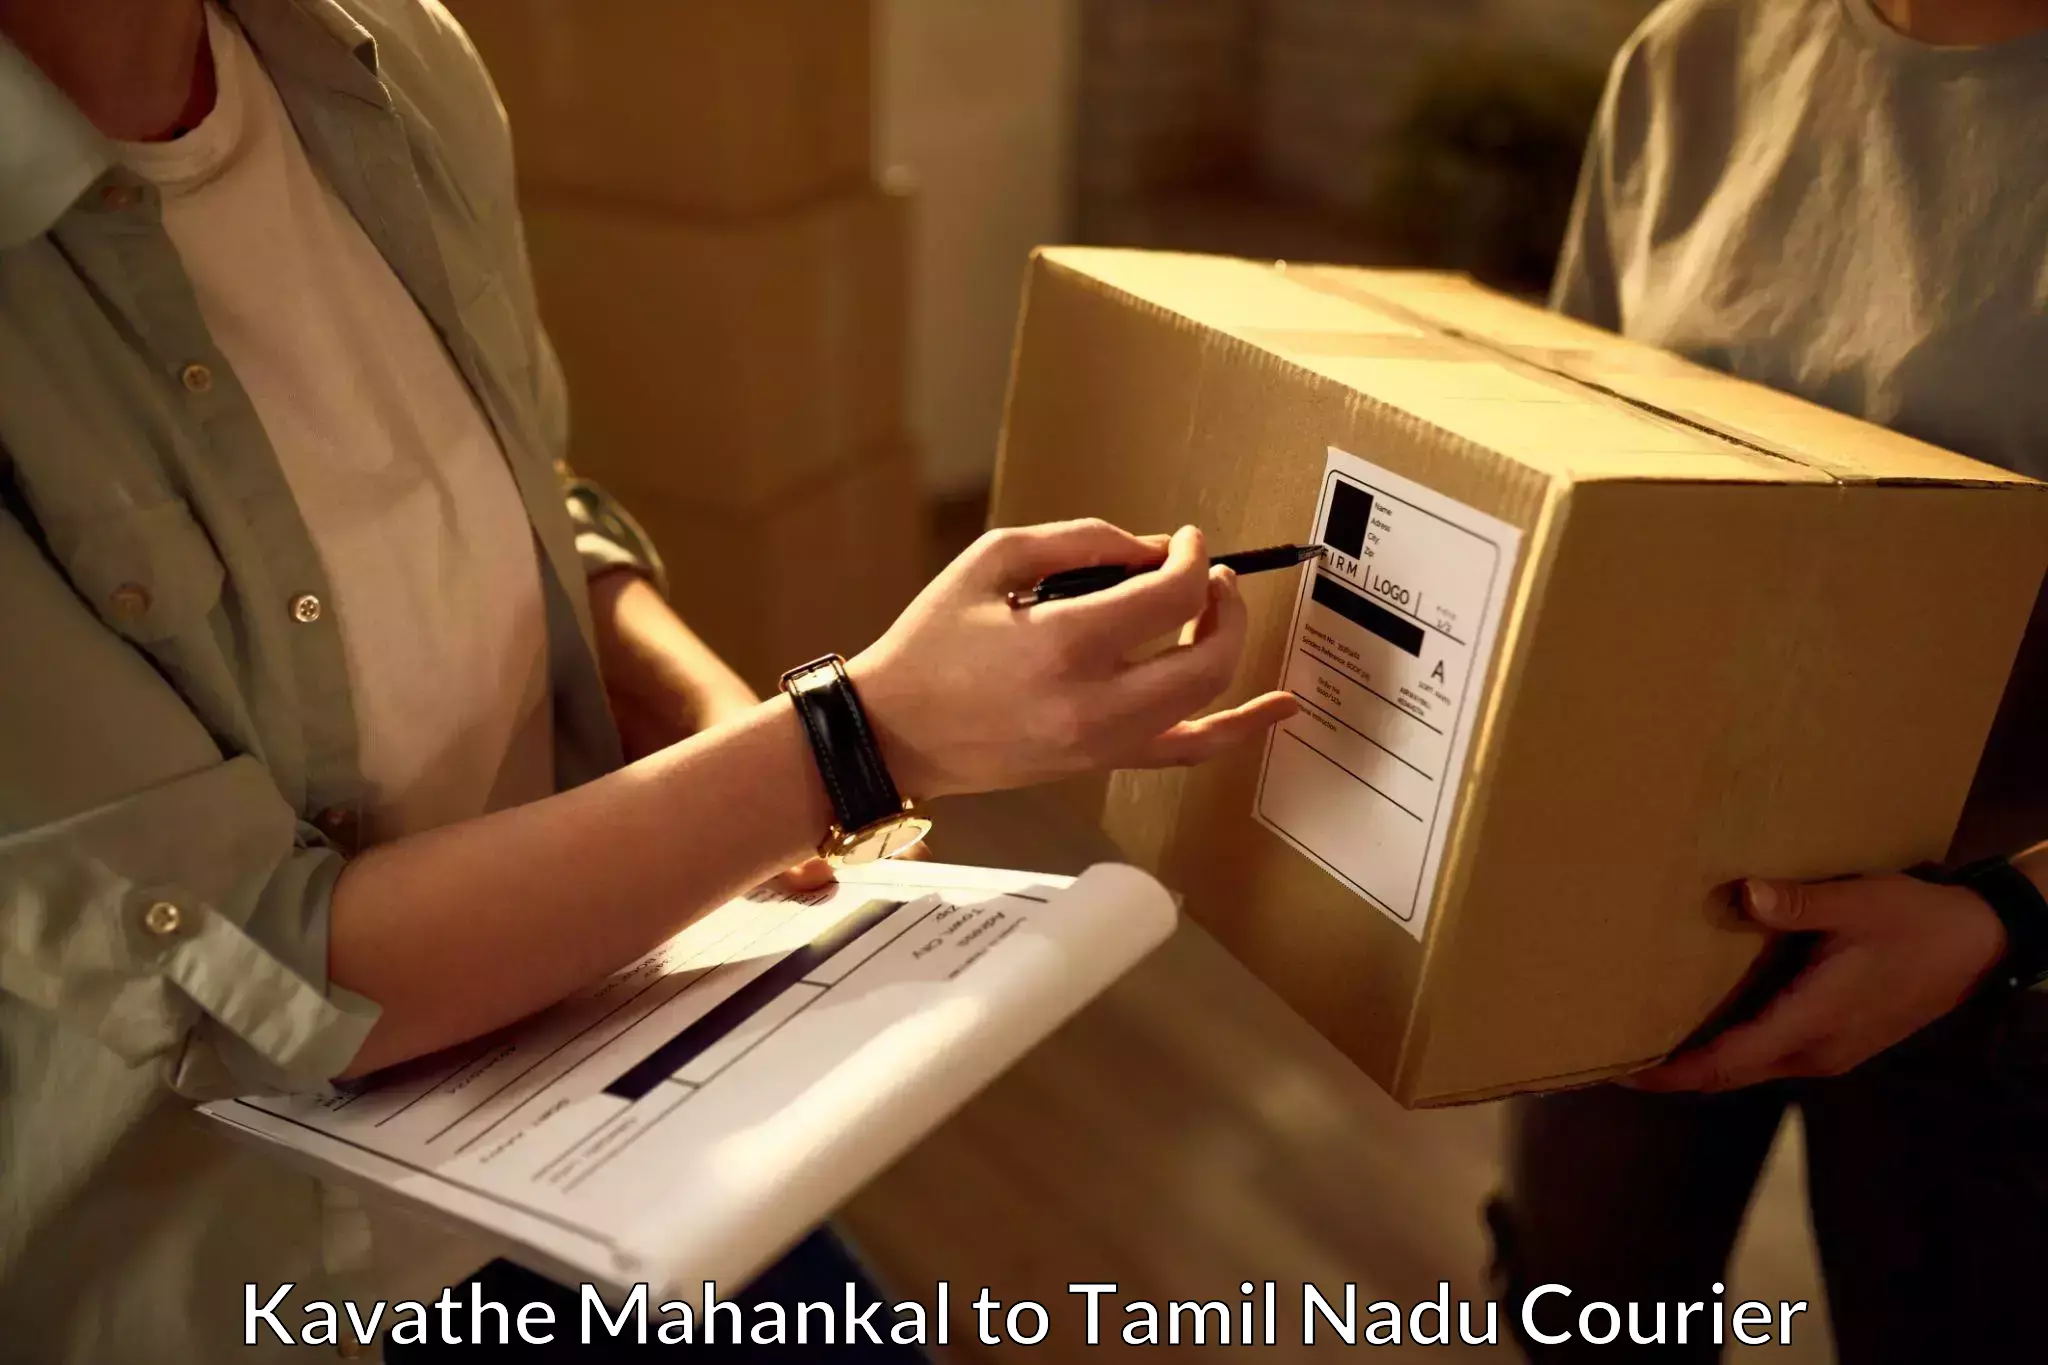 Special handling courier Kavathe Mahankal to Peralam